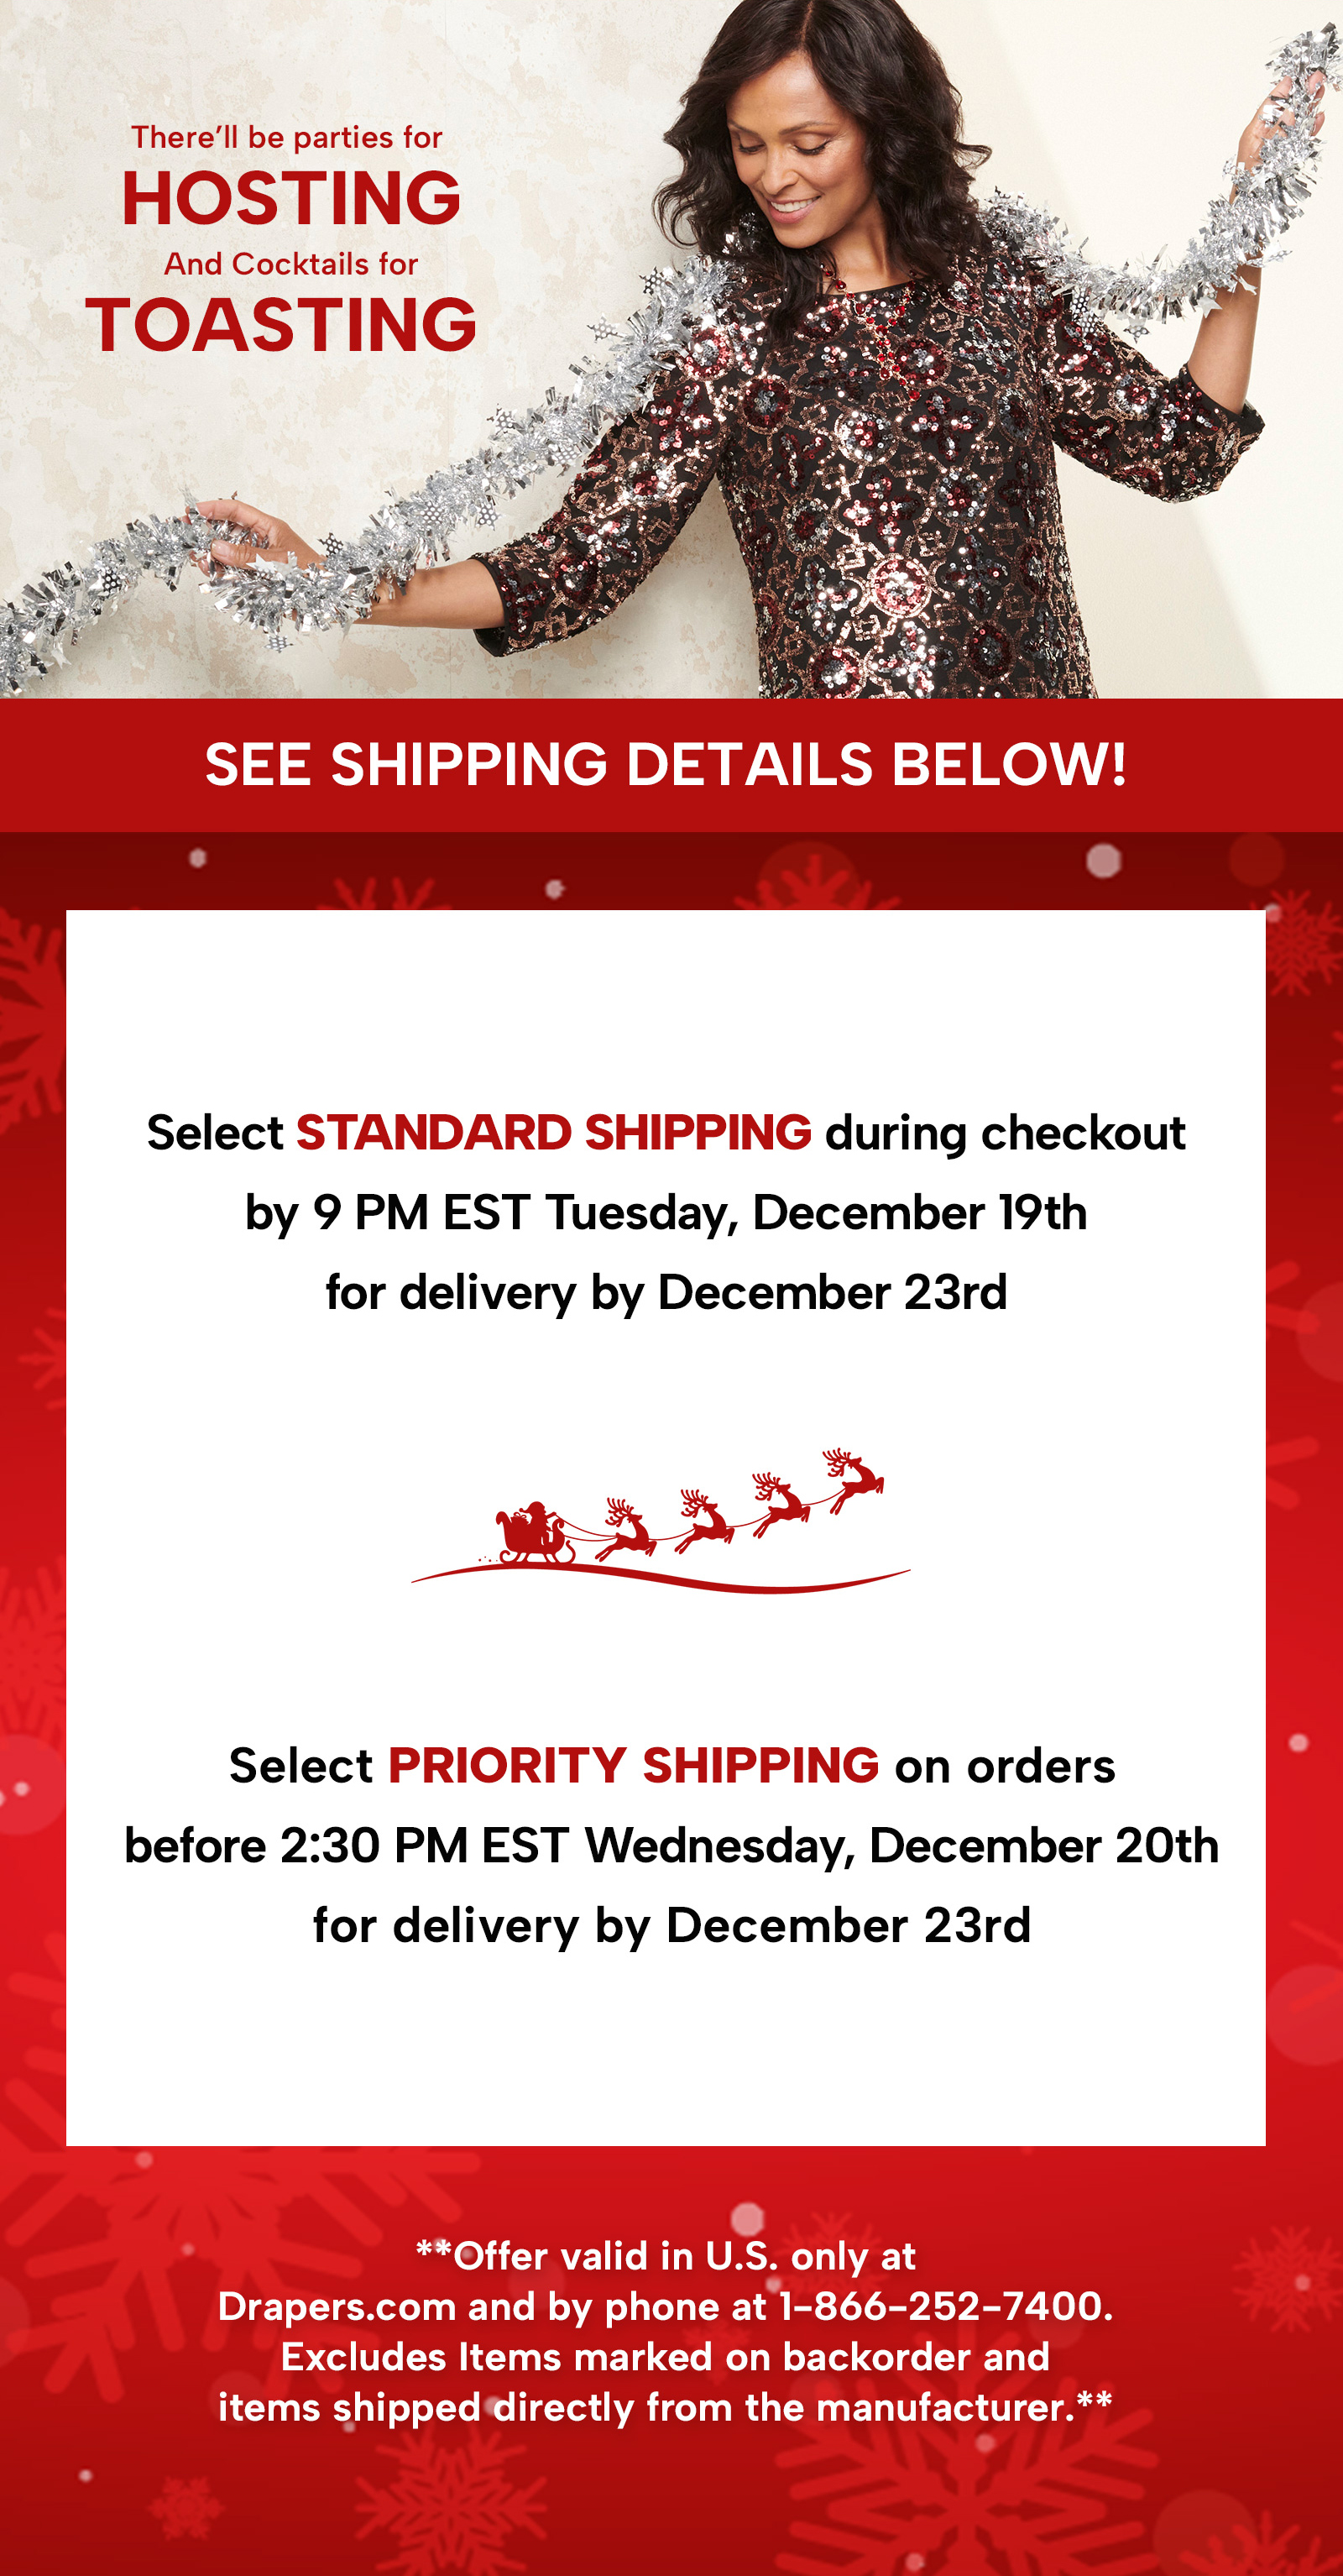 There'll be parties for hosting and cocktails for toasting! See shipping details below. Select standard shipping during checkout by 11:59PM EST Monday, December 18th for delivery by December 23rd. Select Priority shipping on orders  before 2:30 PM EST Wednesday, December 20th for delivery by December 23rd ** Offer valid in U.S. only at Drapers.com and by phone at 1-800-252-7400. Excludes items marked on backorder and items shipped directly from the manufacturer.**